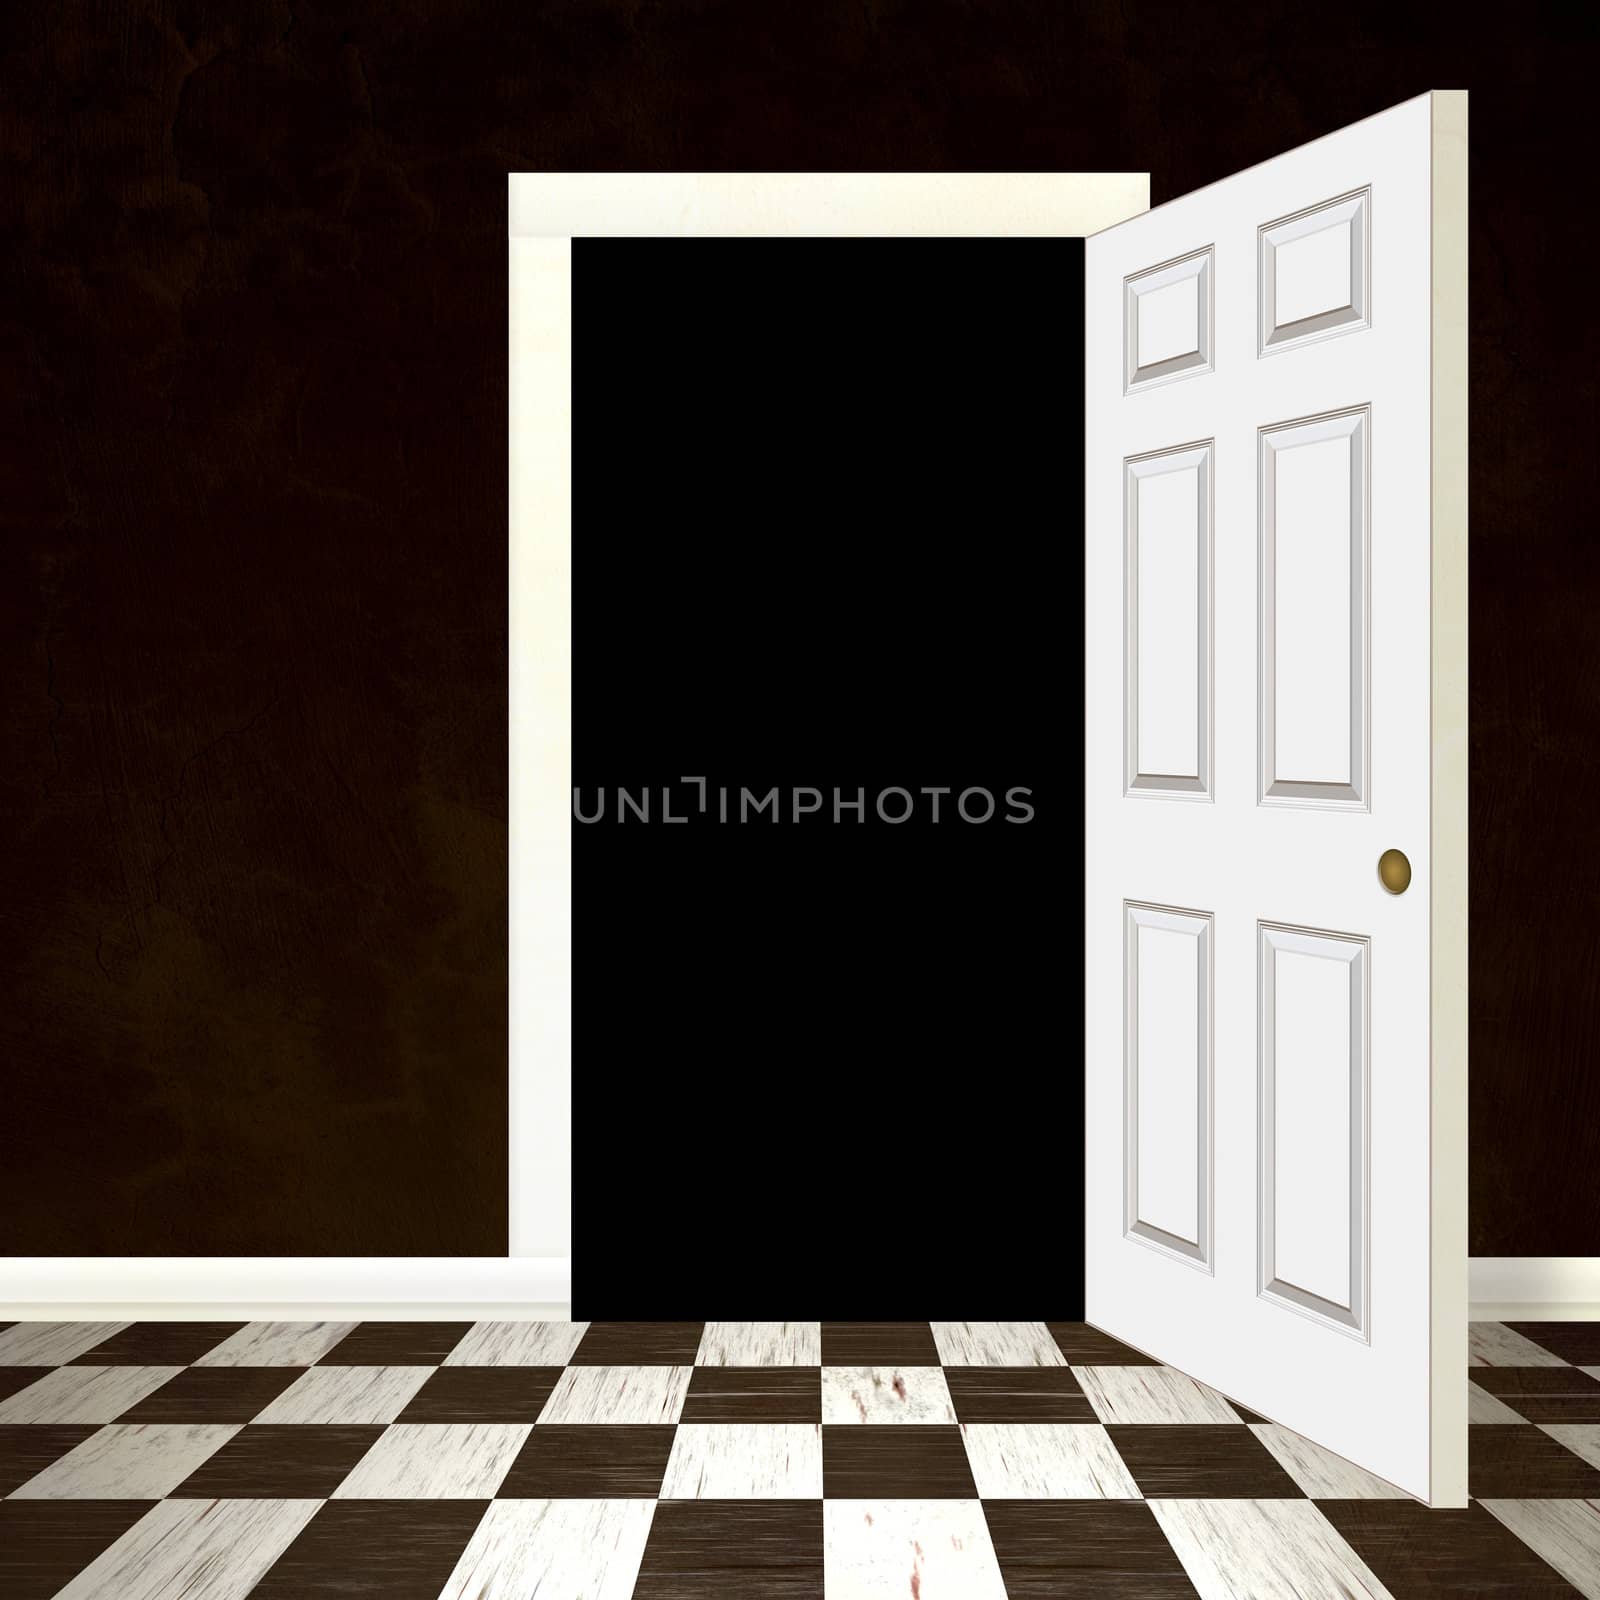 An entrance with an opened doorway and copyspace in the black area to insert your own graphic or photo.